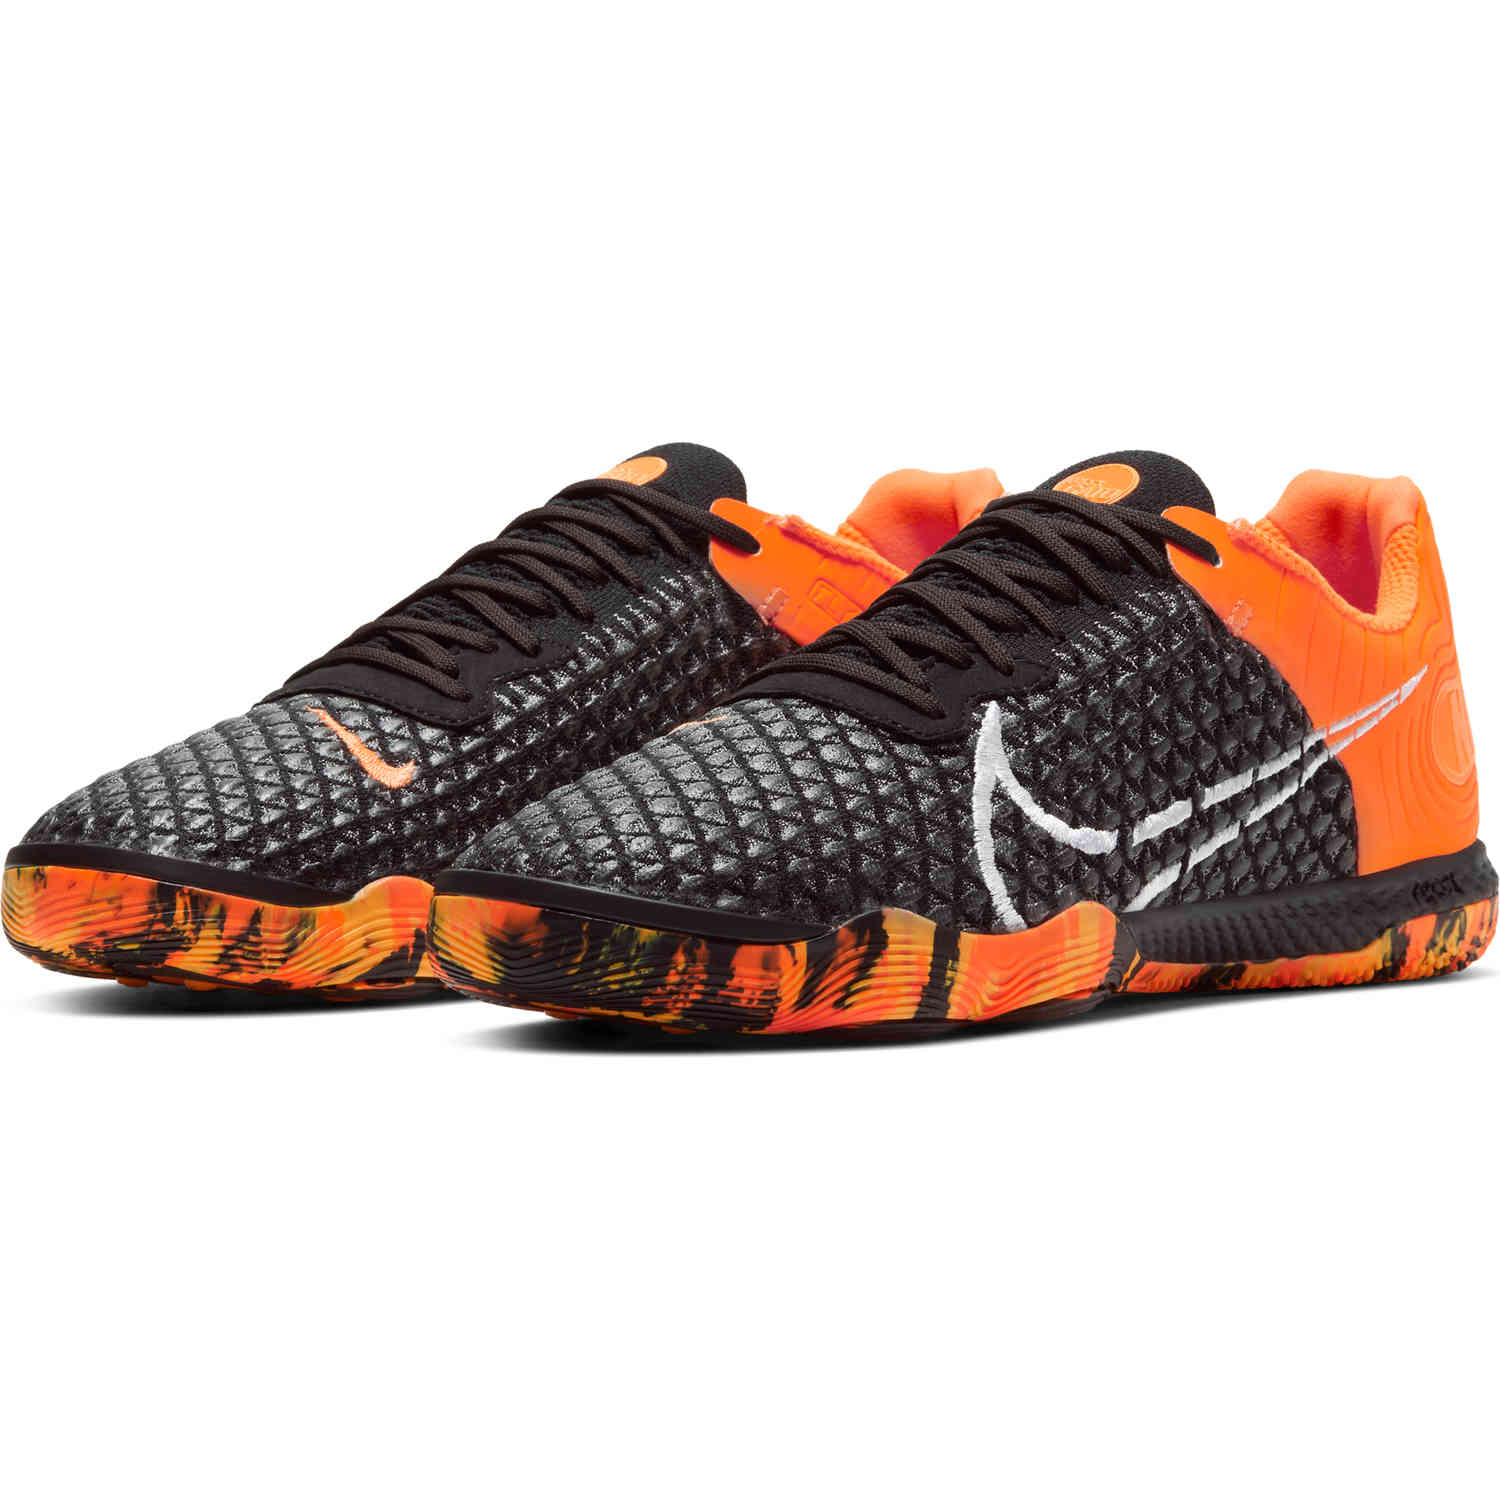 nike react indoor soccer shoes